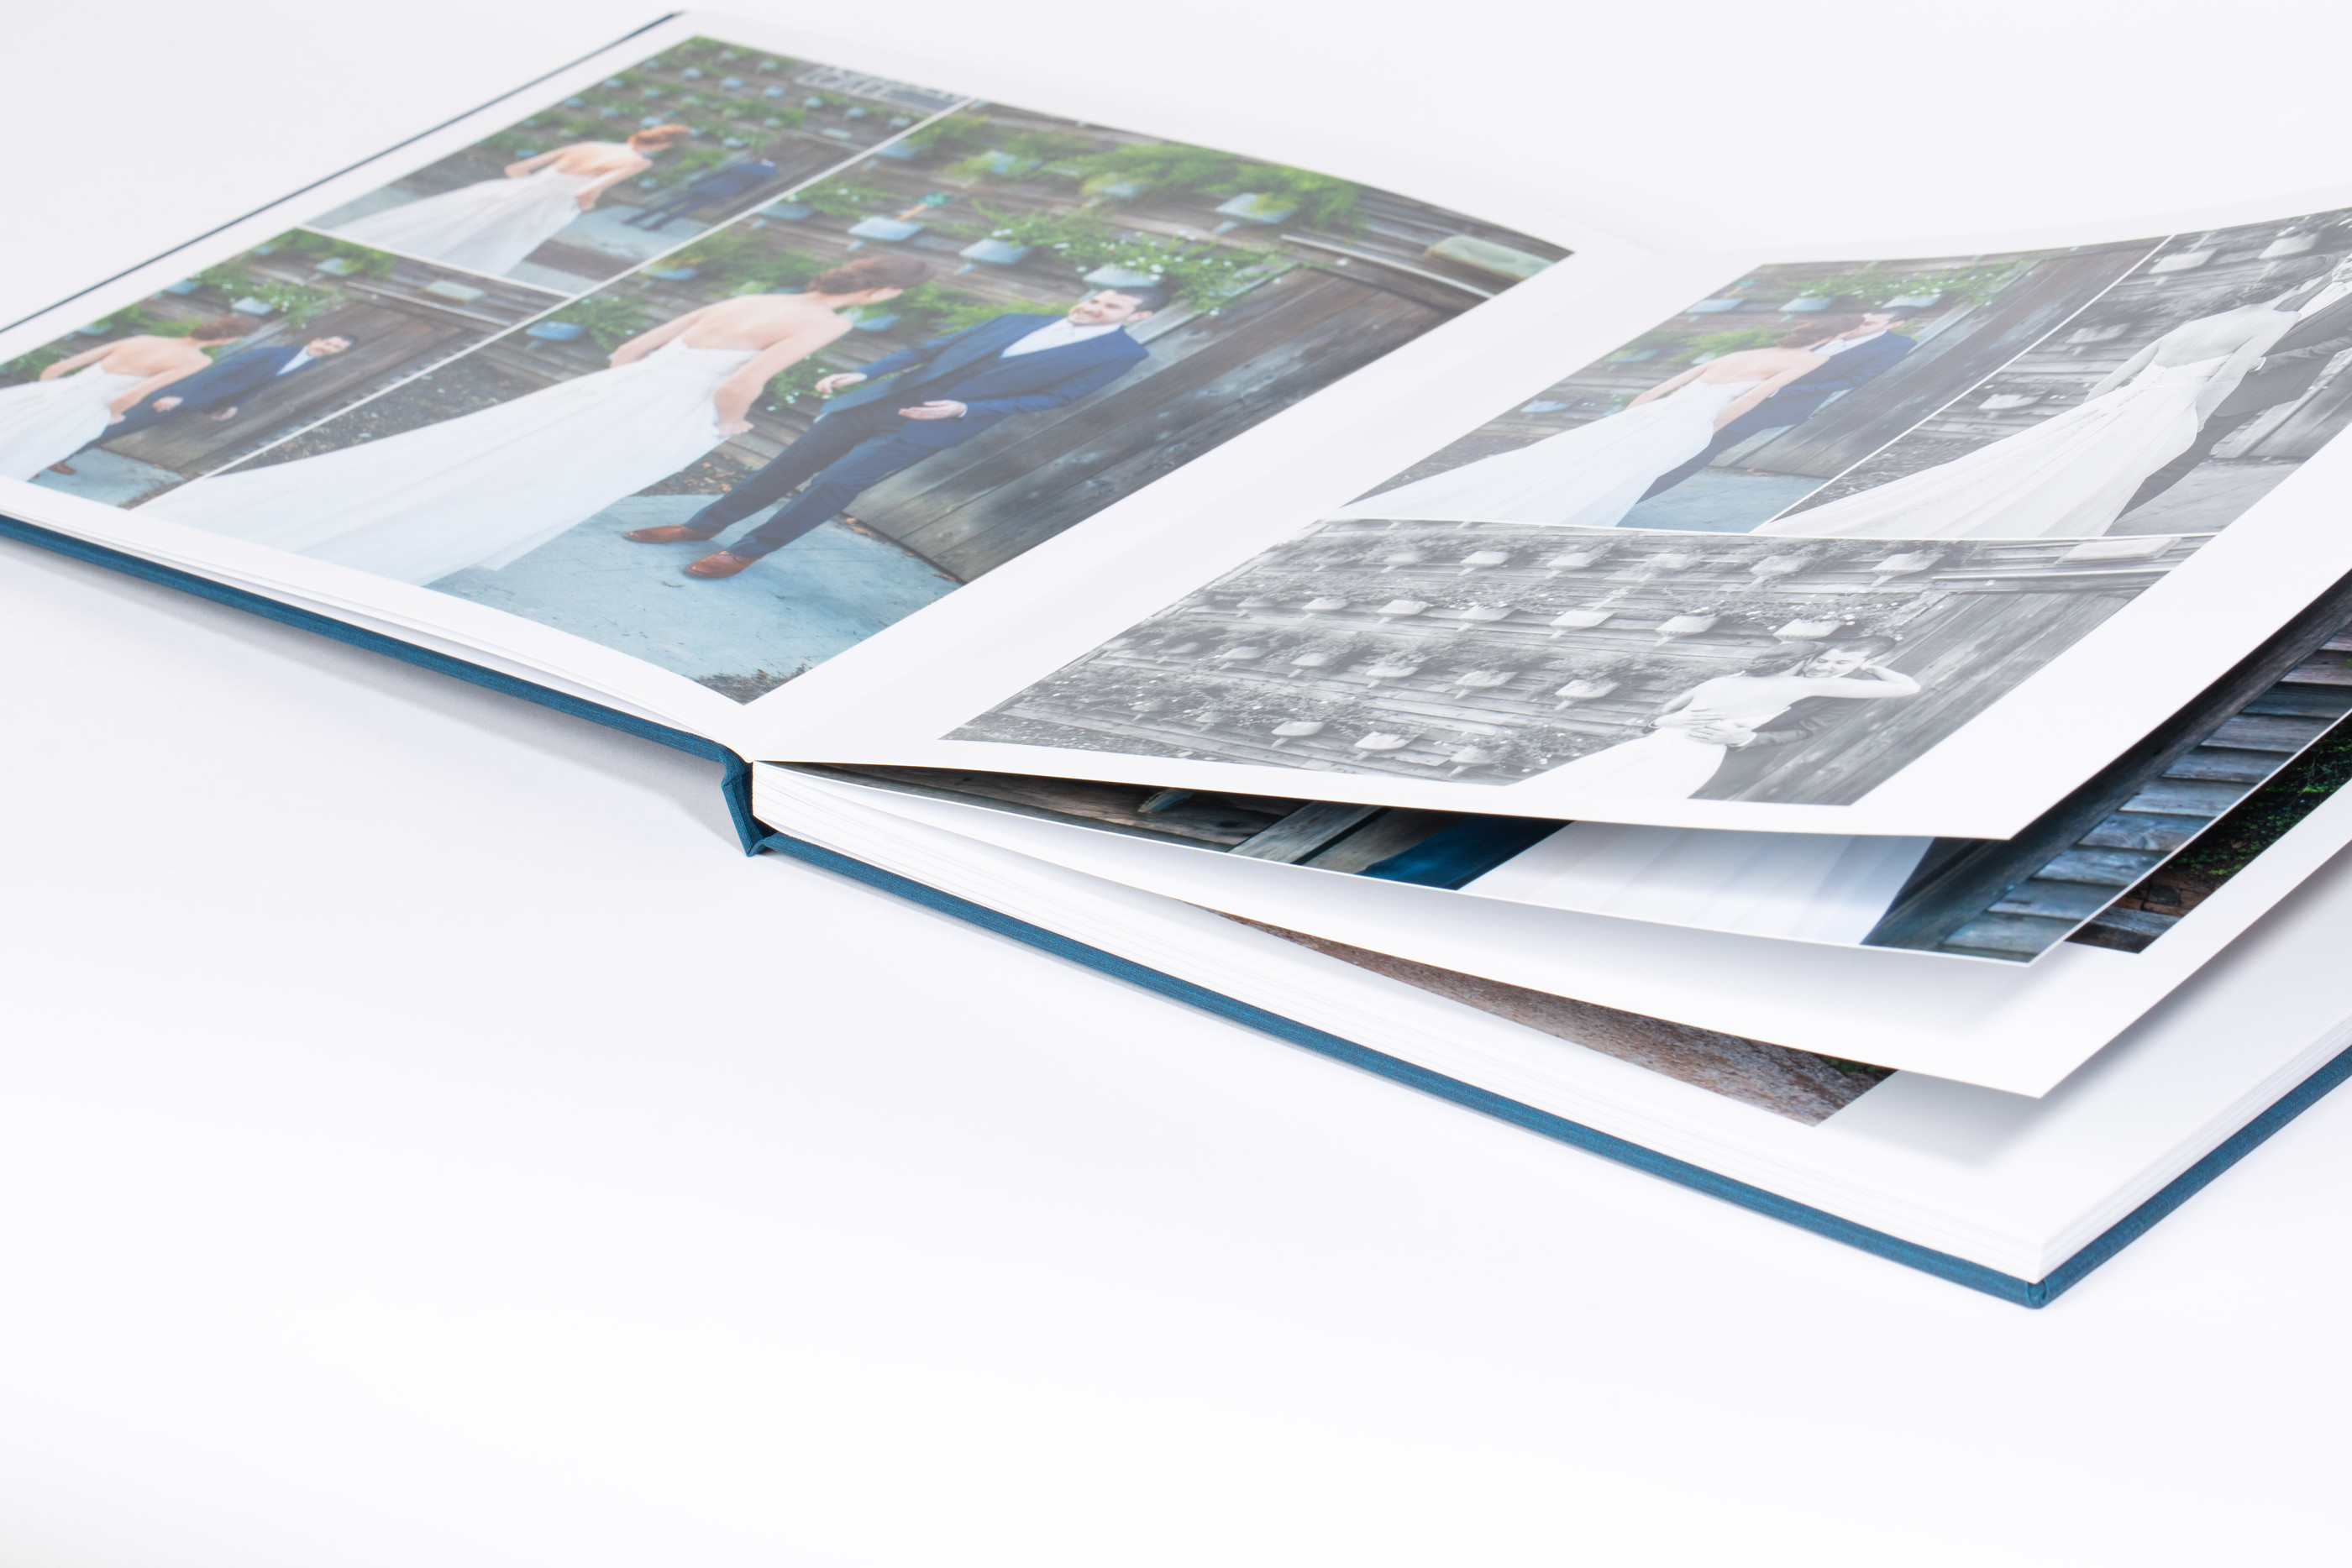 Open layflat photo book showing uninterrupted double page spread